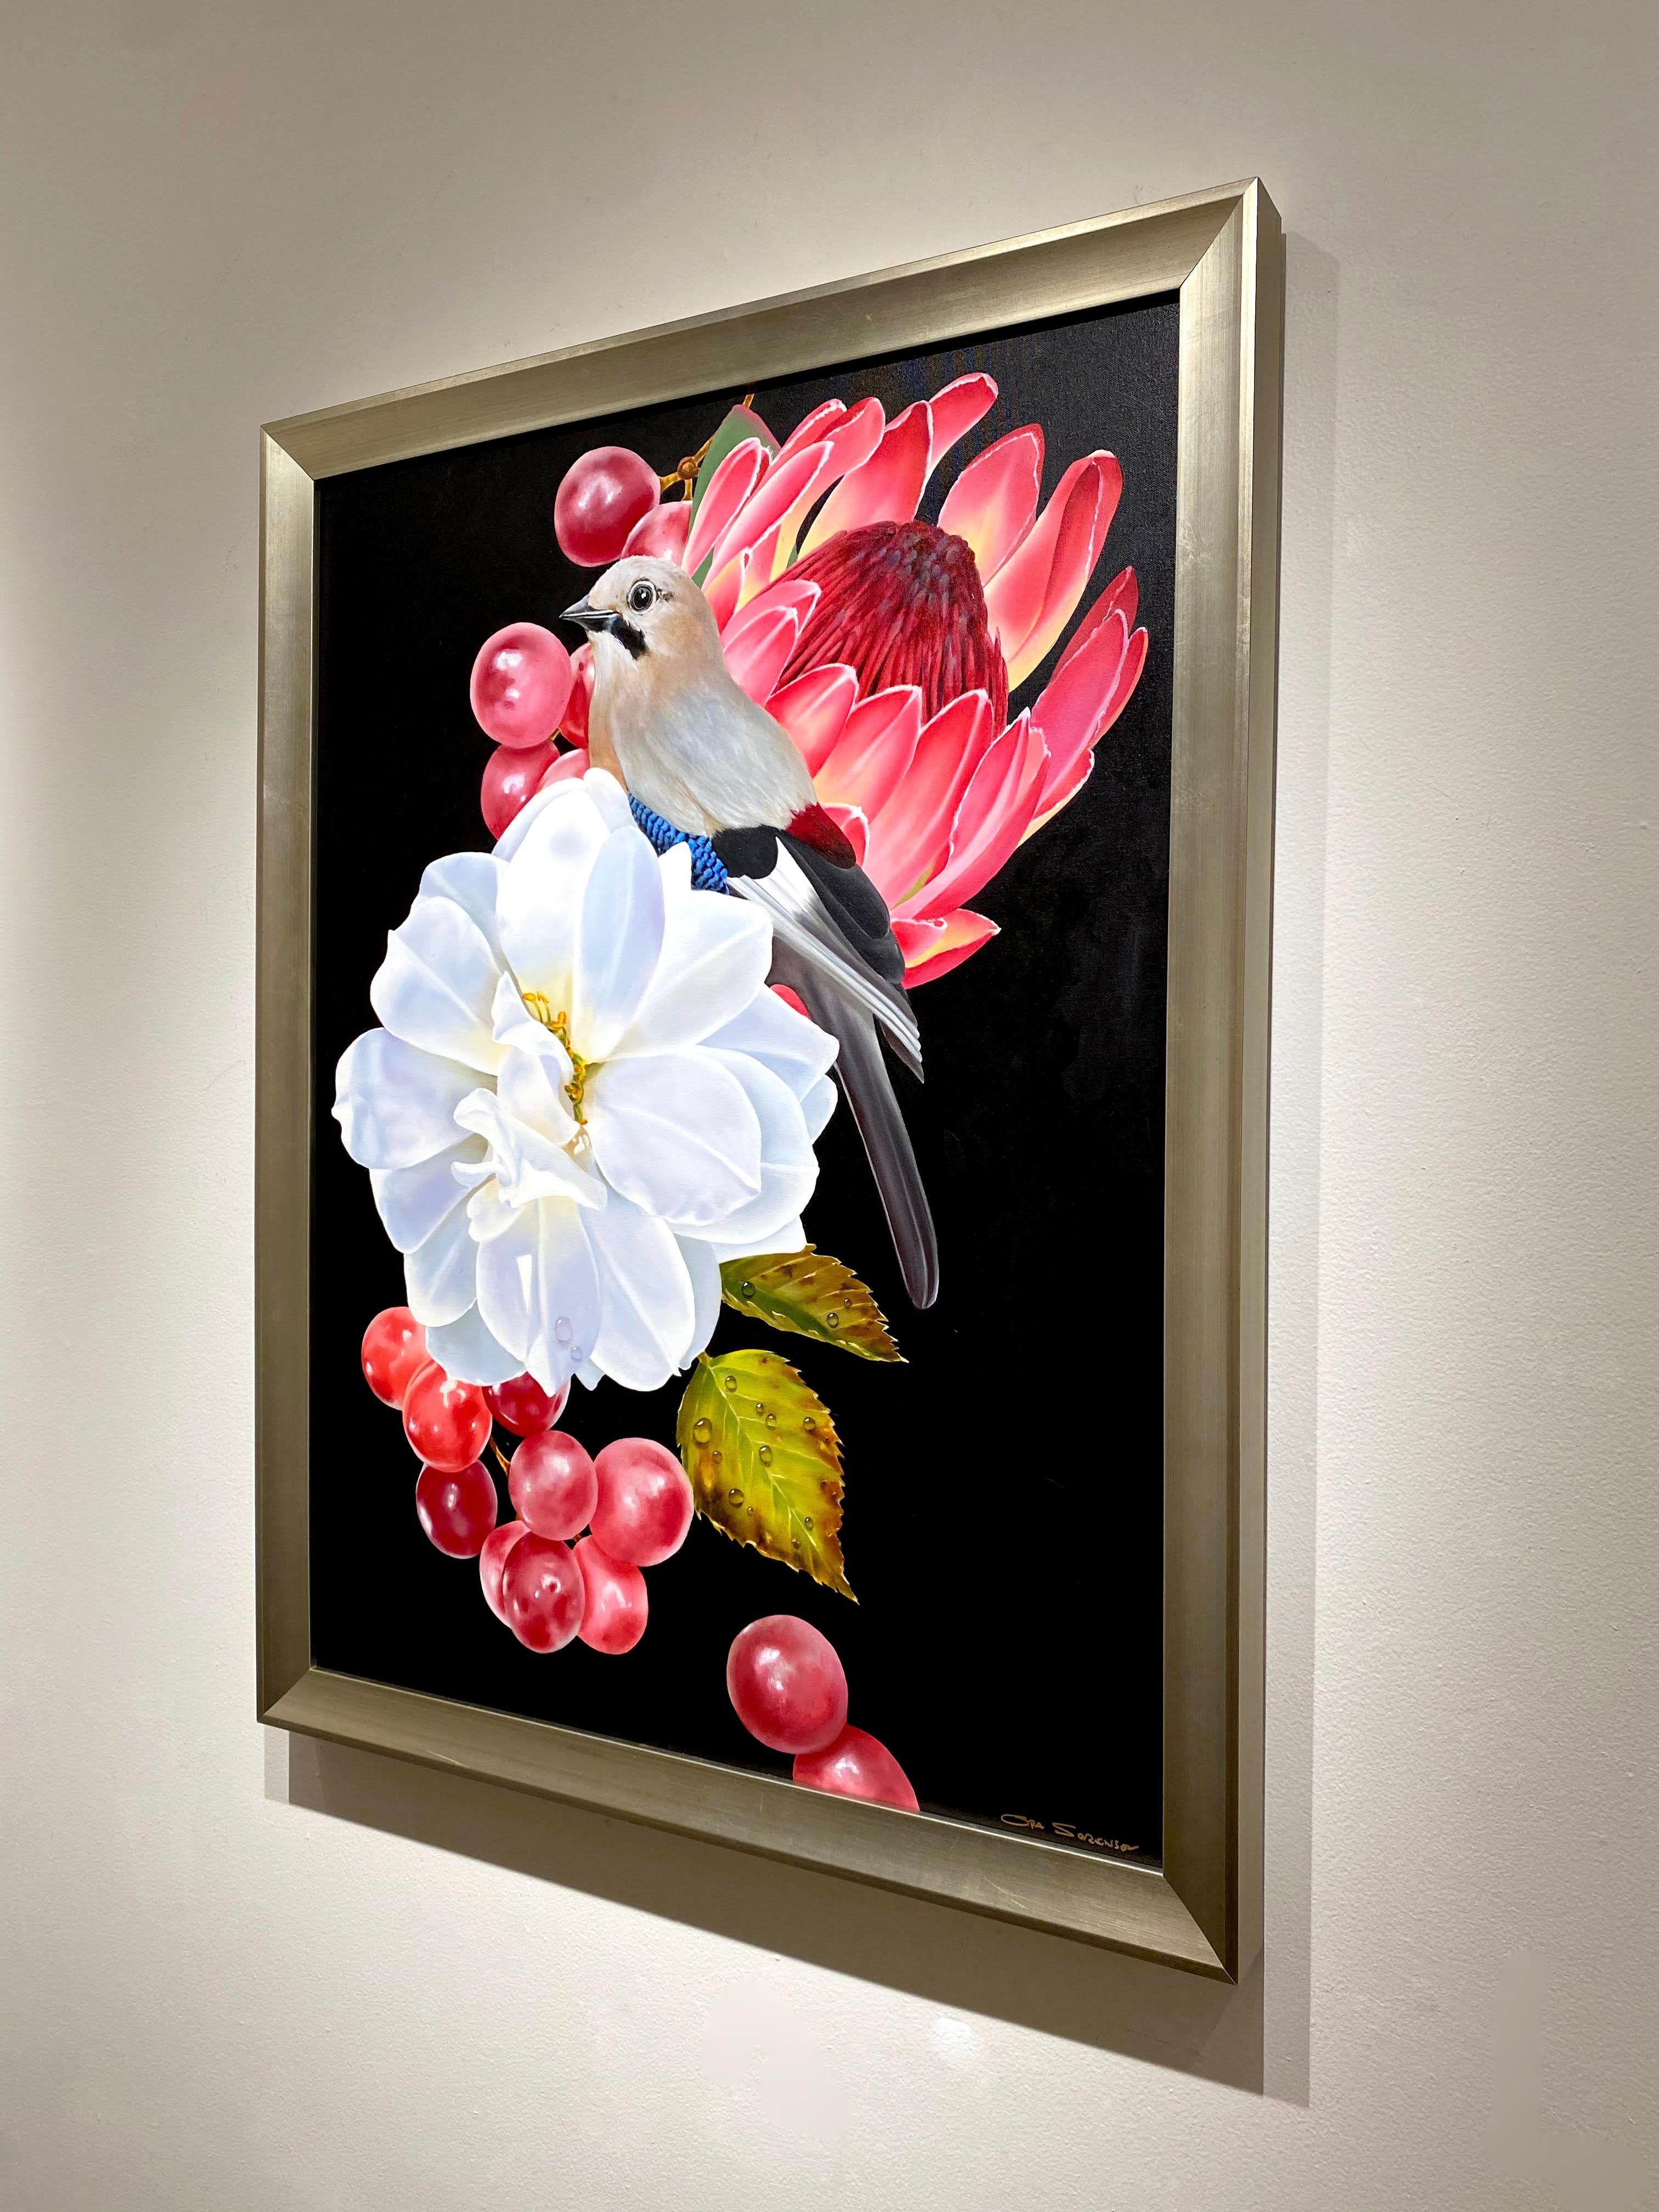 This hyperrealist floral 